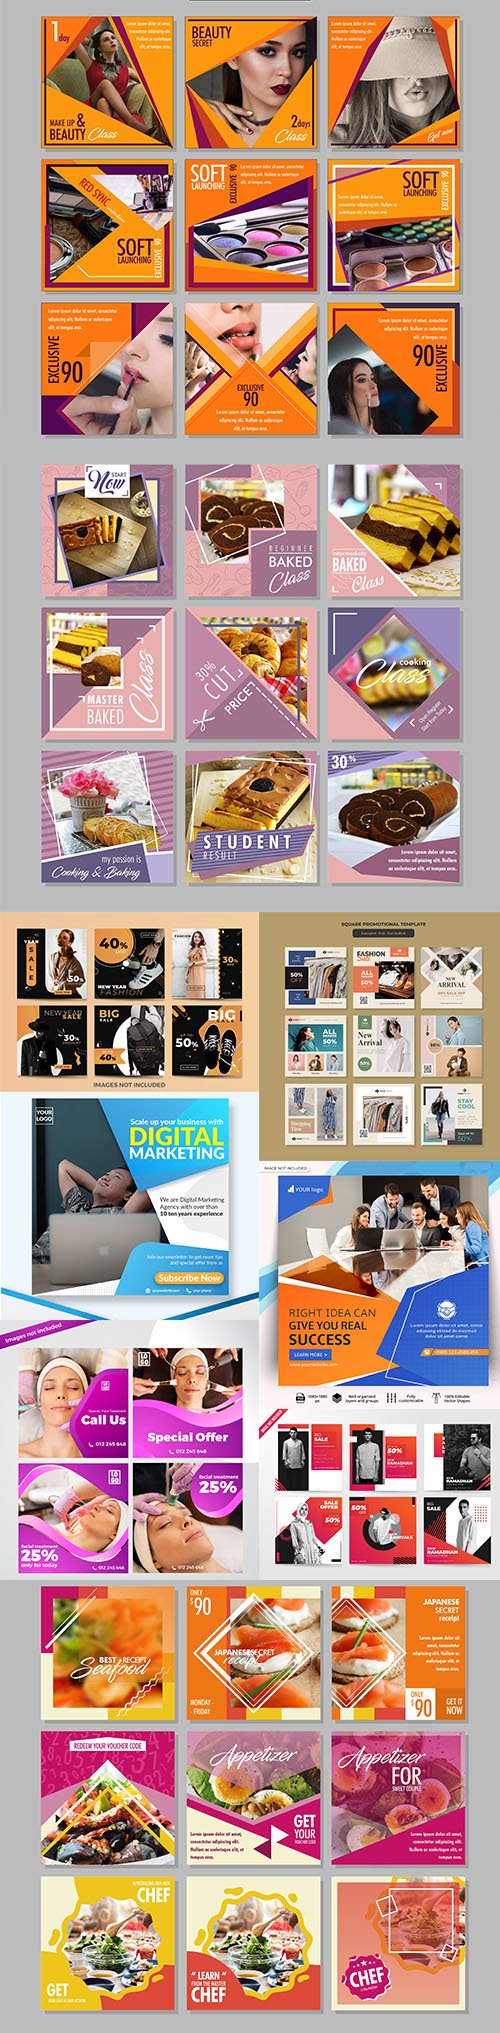 Social Media Post PSD and EPS Template Set 2